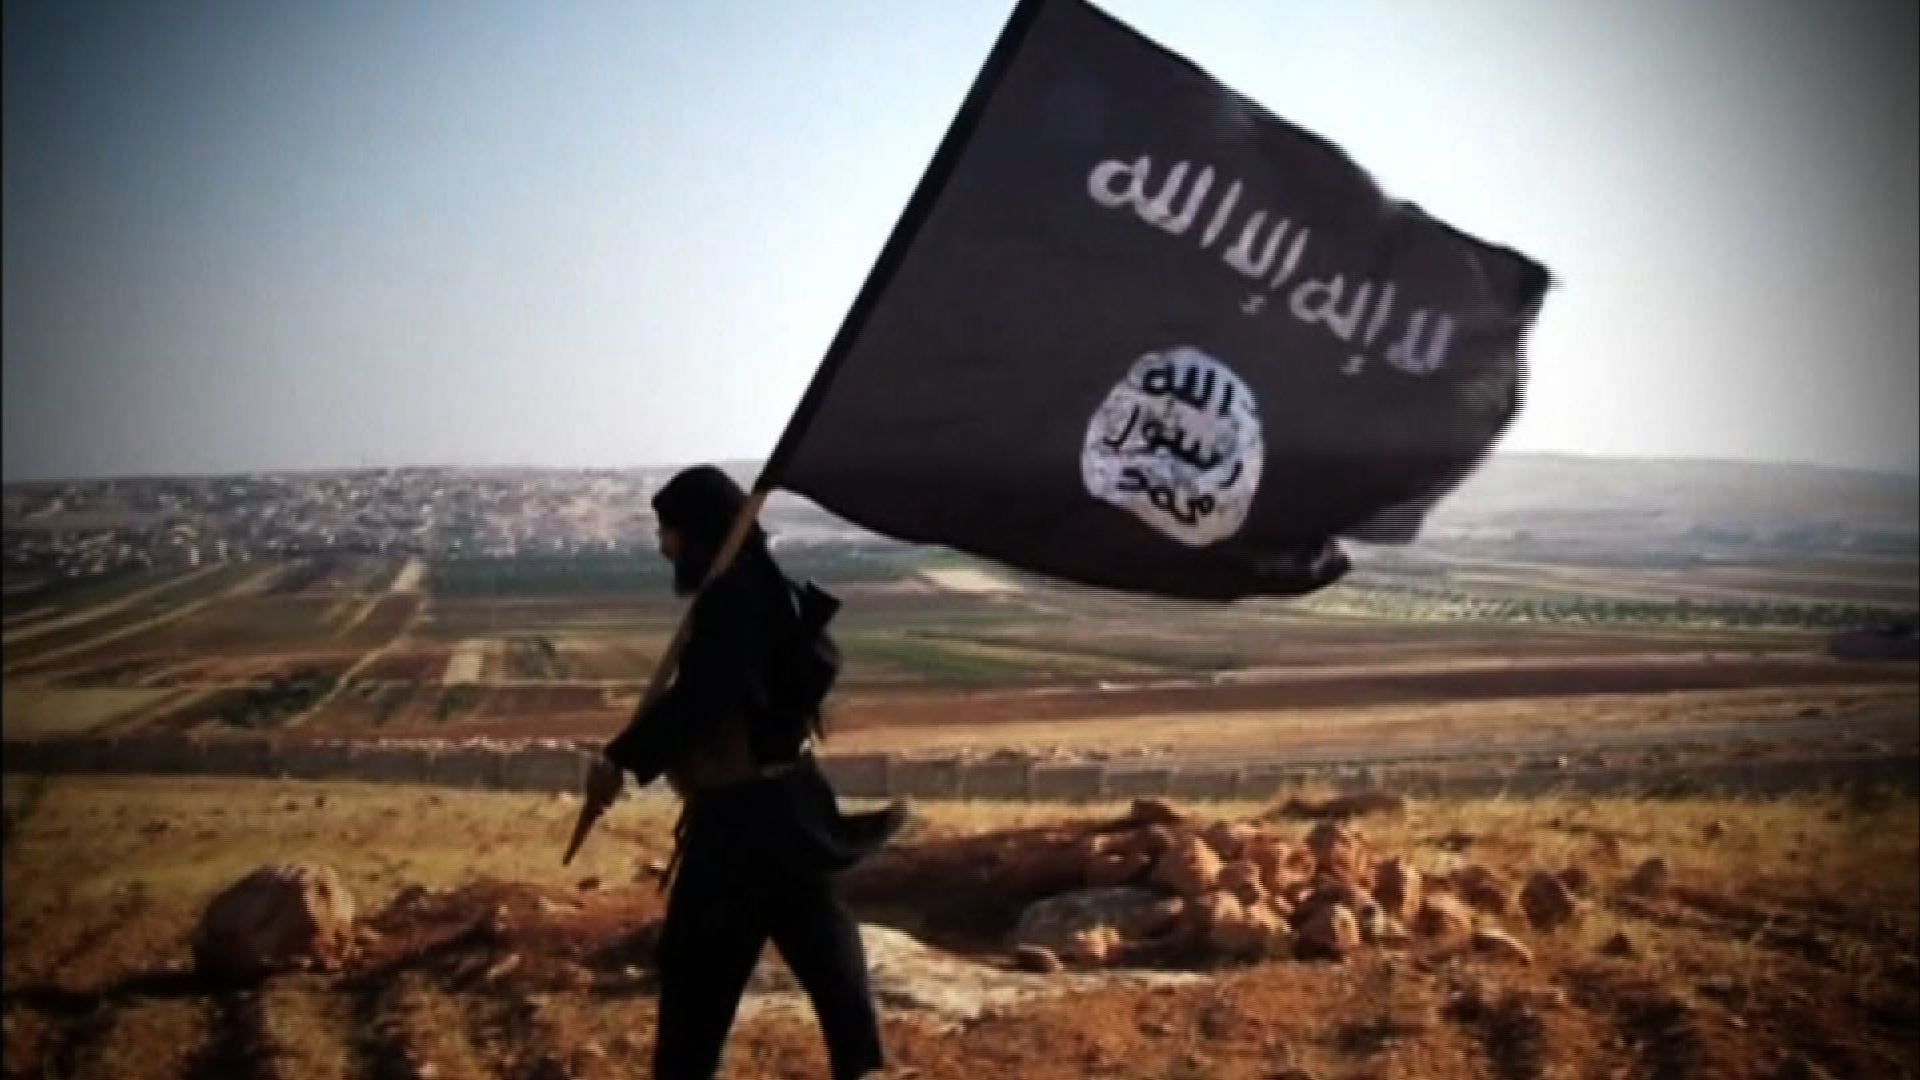 ISIS Declares Caliphate - Rebrands as "The Islamic State"